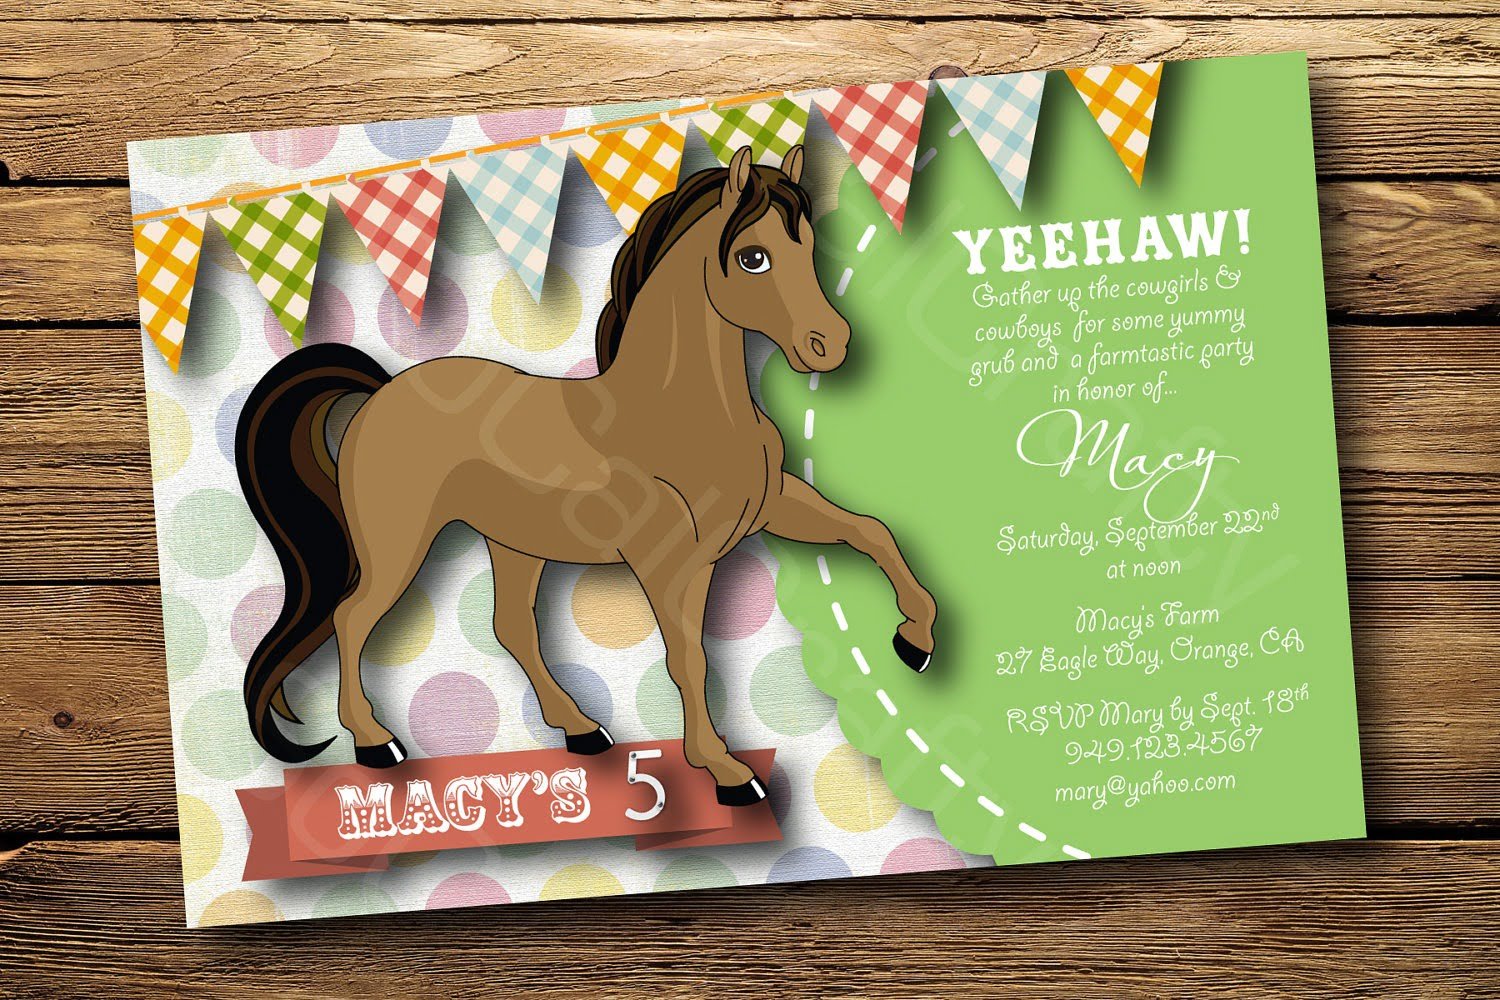 Horse Party Invitations Horse Party Invitations With A Marvelous